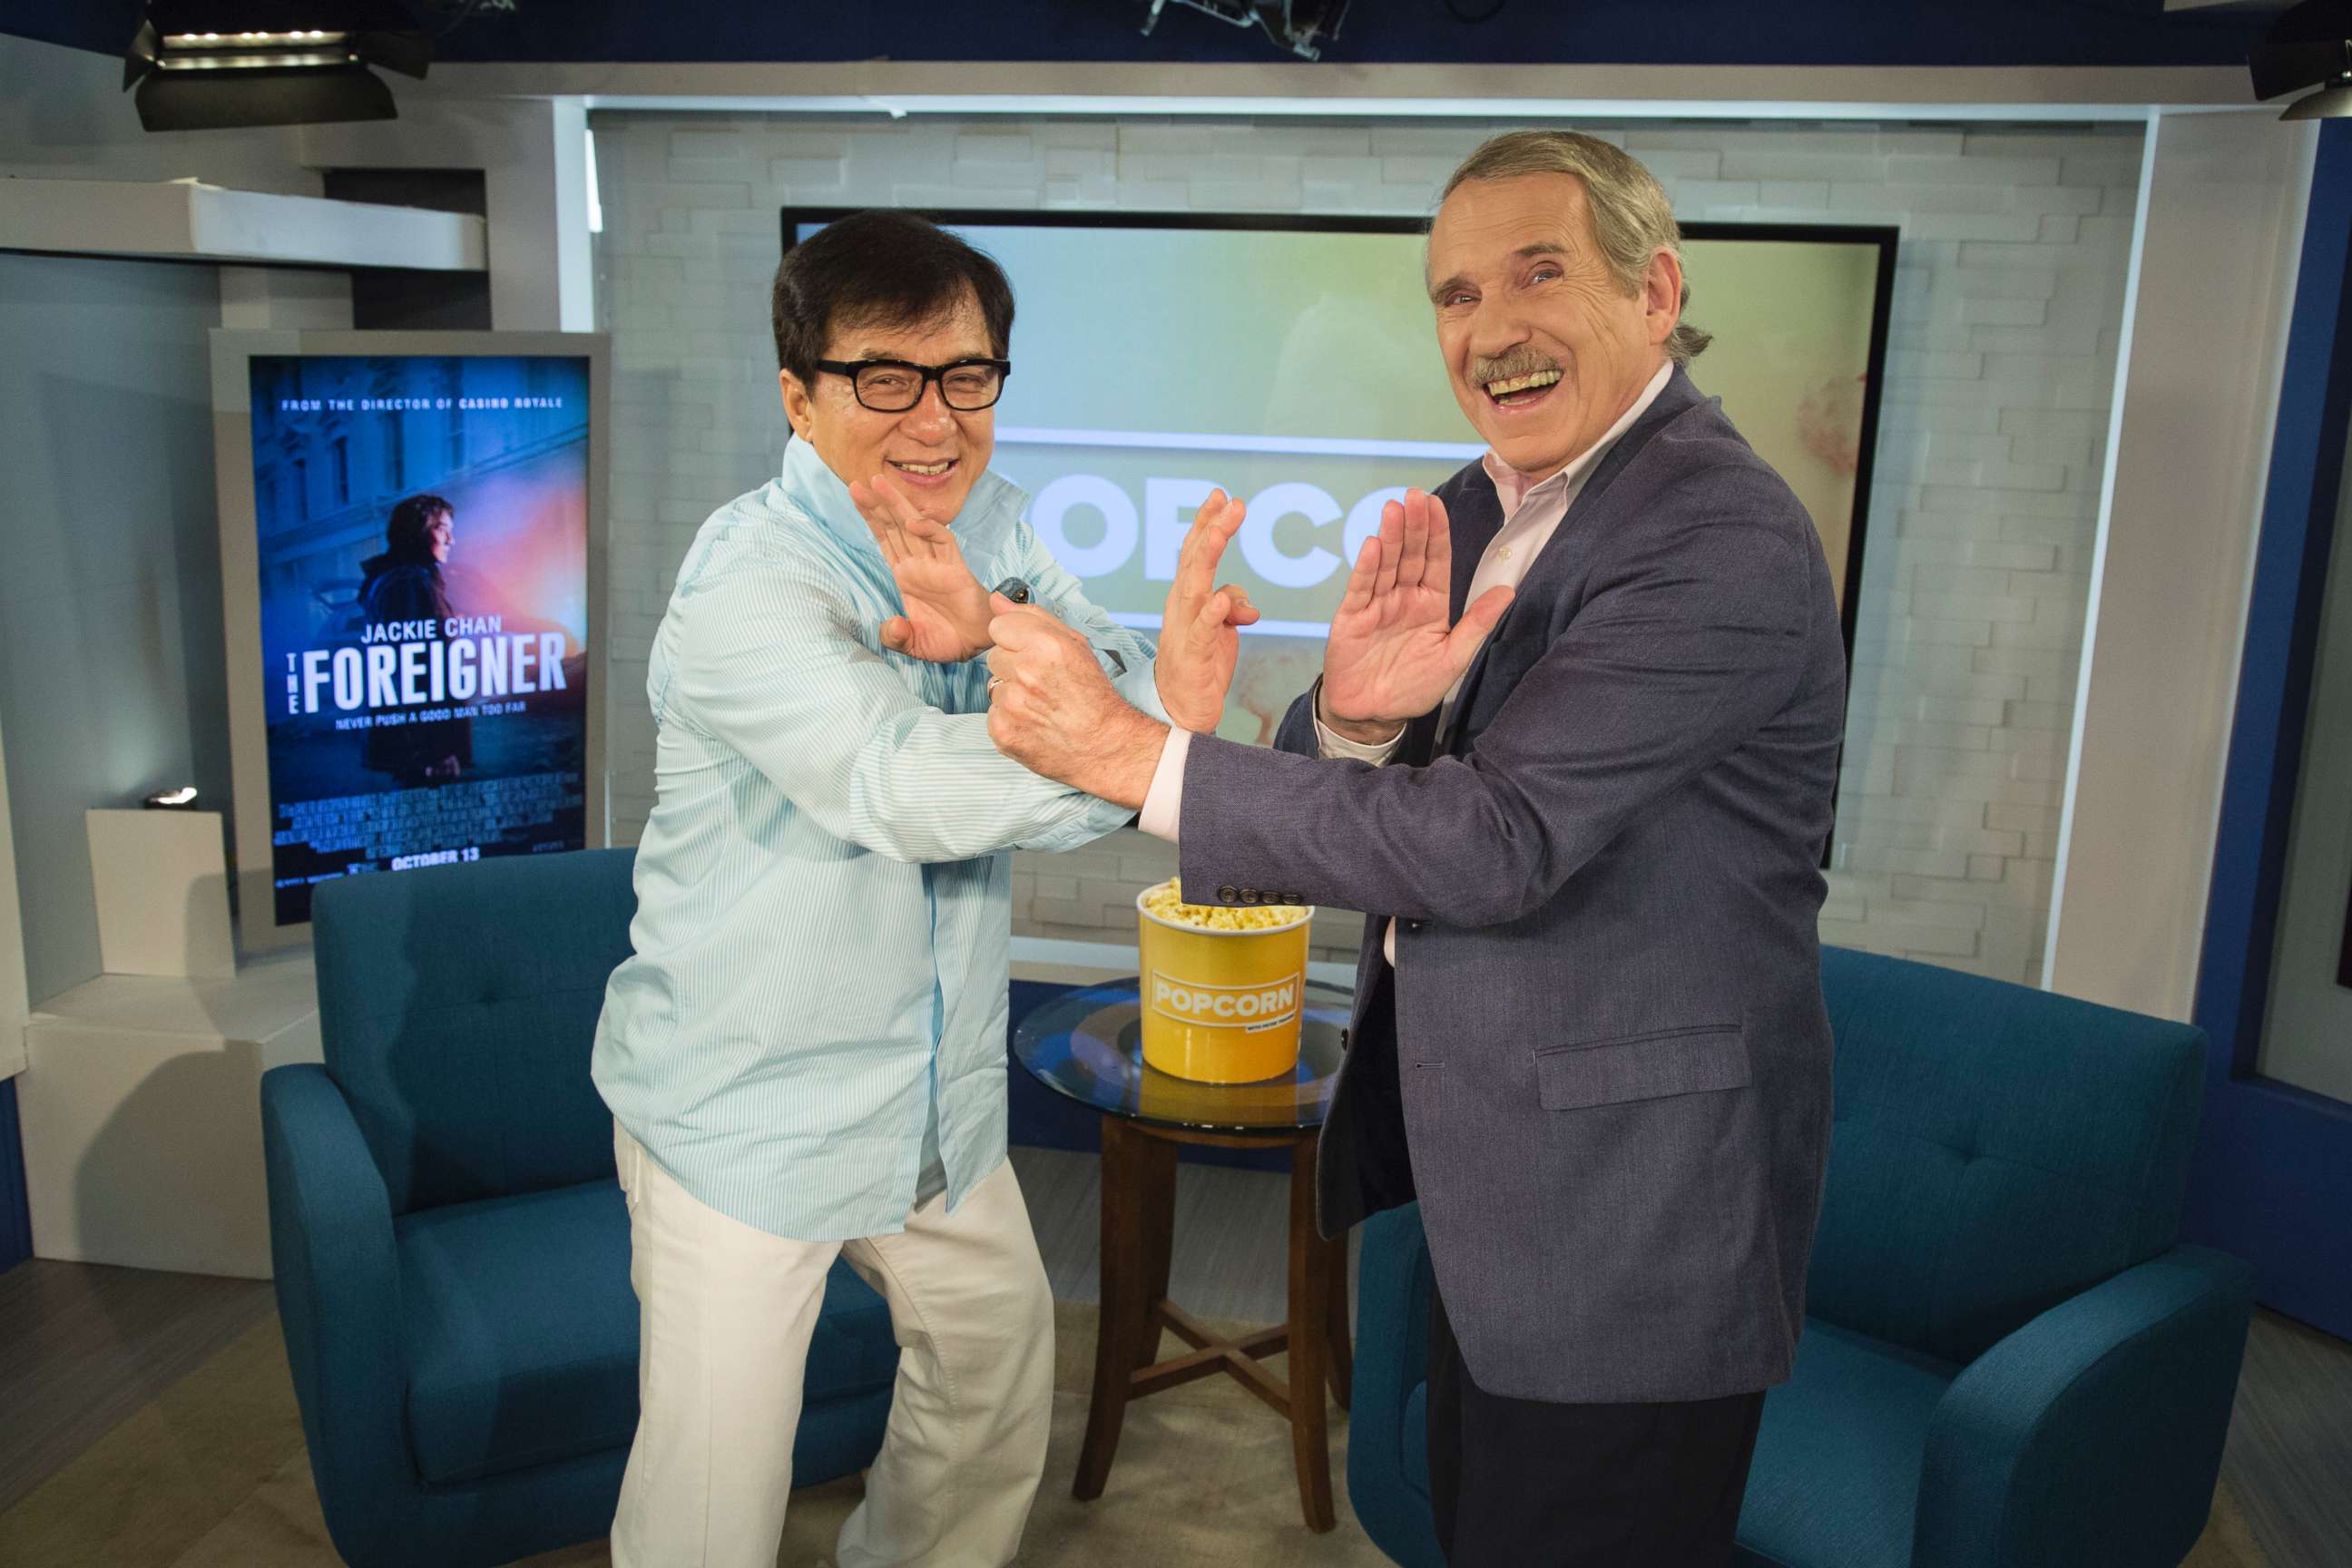 PHOTO: Peter Travers and Jackie Chan at the ABC News studios in New York City, Oct. 10, 2017.